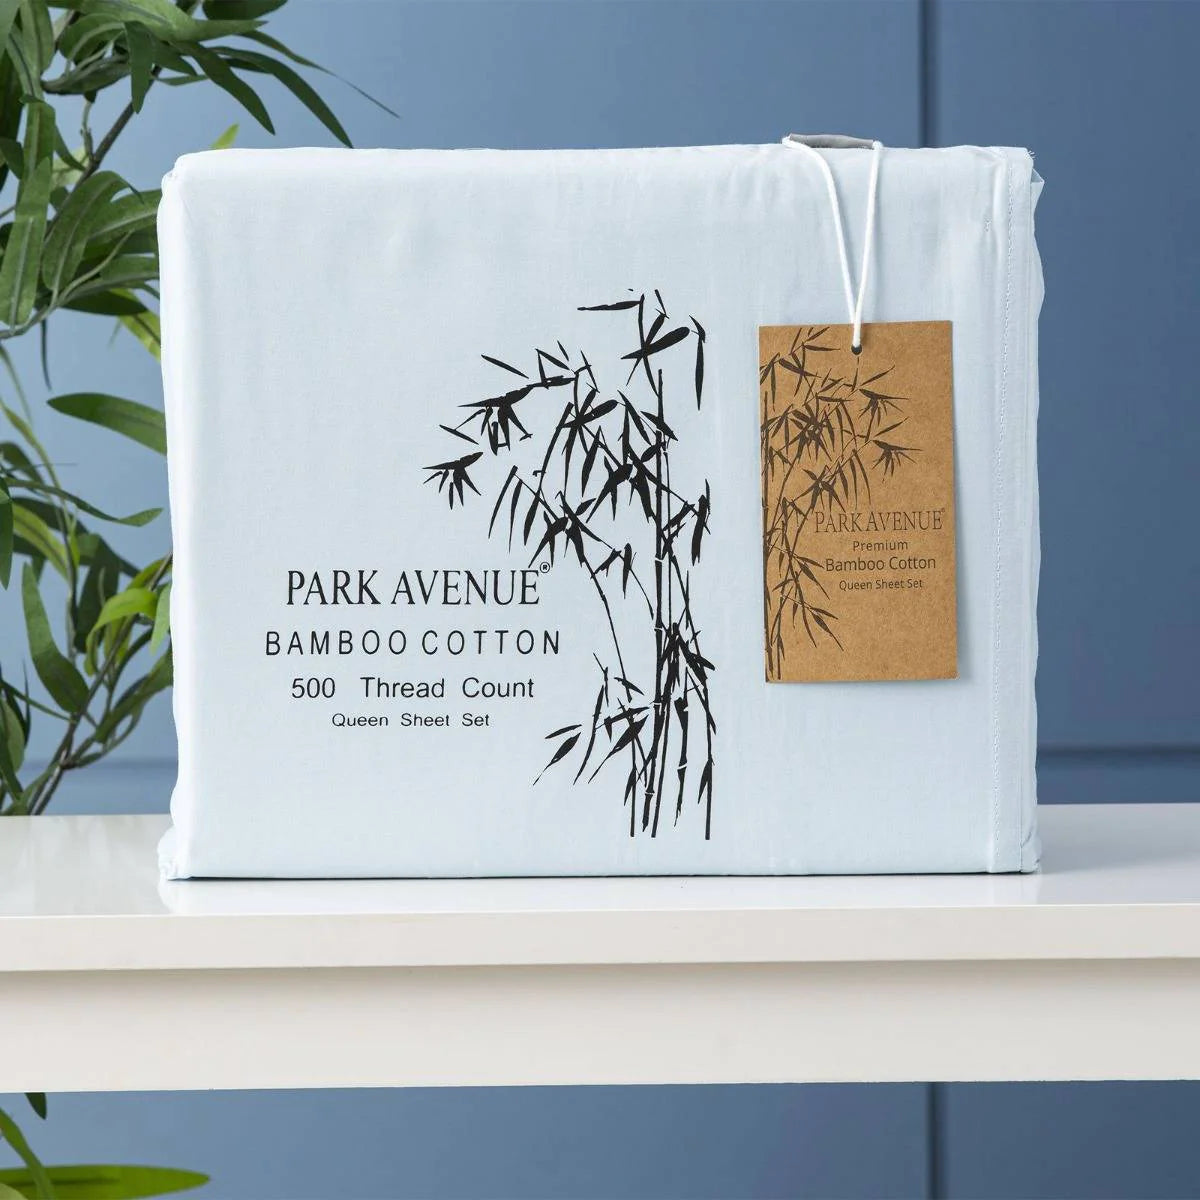 Park Avenue 500 Thread count Natural Bamboo Cotton Sheet set Mid Blue. These Bamboo cotton blend sheet set has been made with the finest 50 % bamboo and 50 % cotton fibres, the naturally silky smooth and unique sheen of the bamboo protects your skin against any irritation.